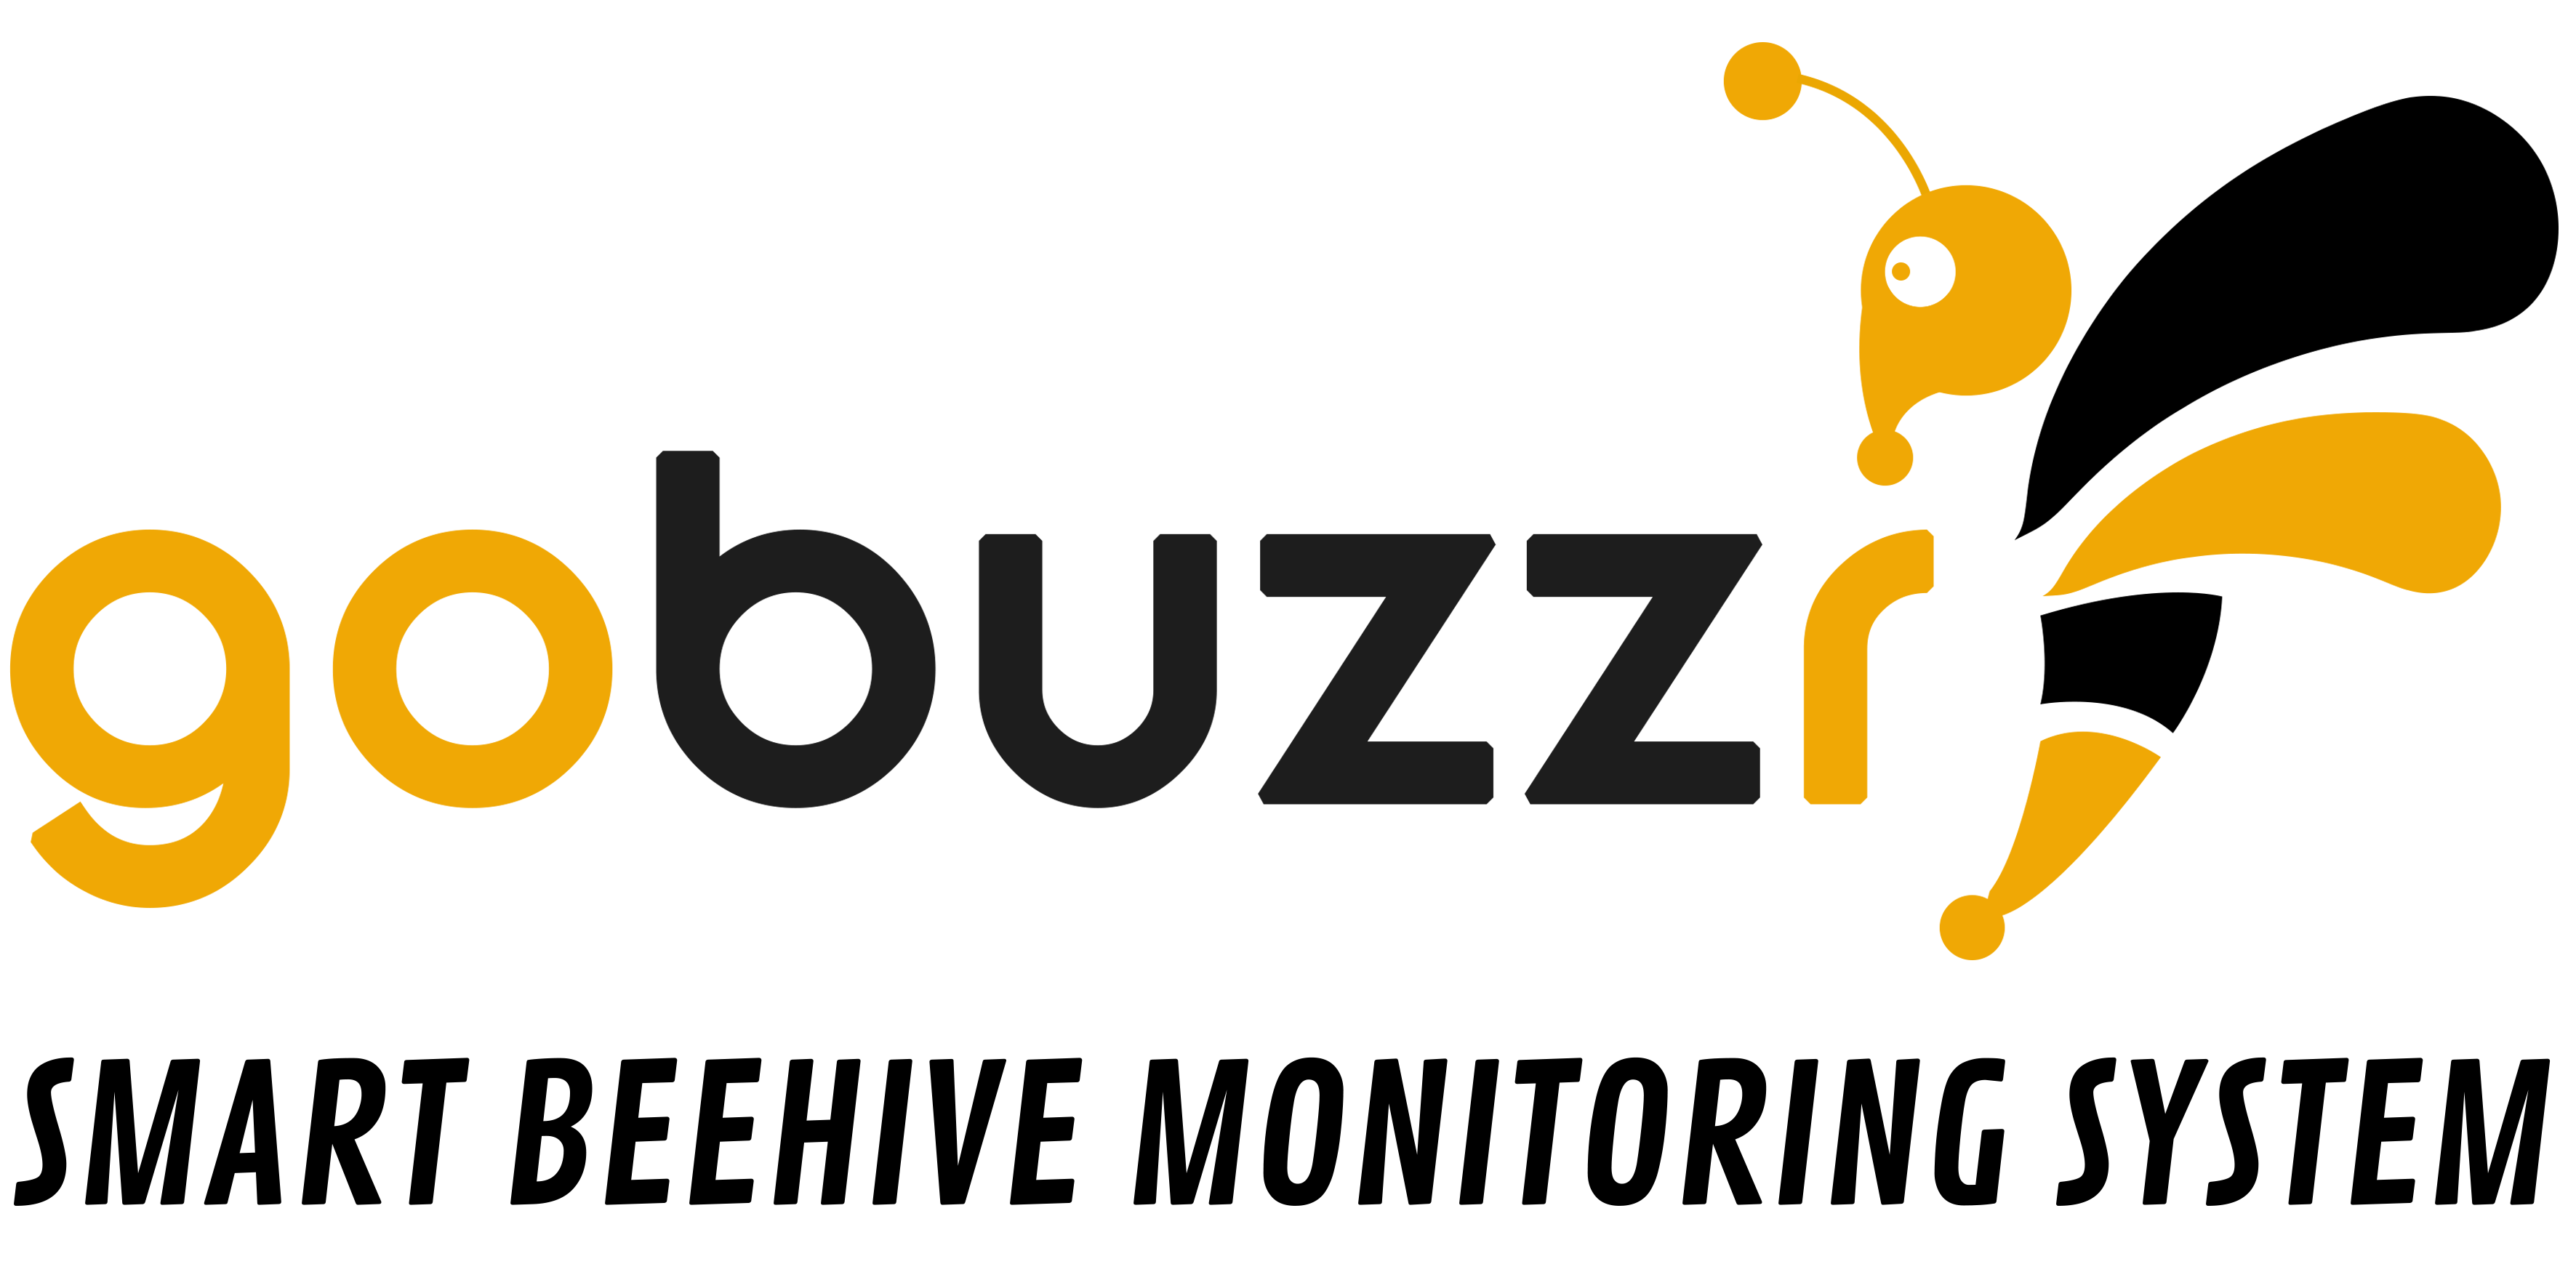 Gobuzzr - Smart Beehive Monitoring System profile on Qualified.One